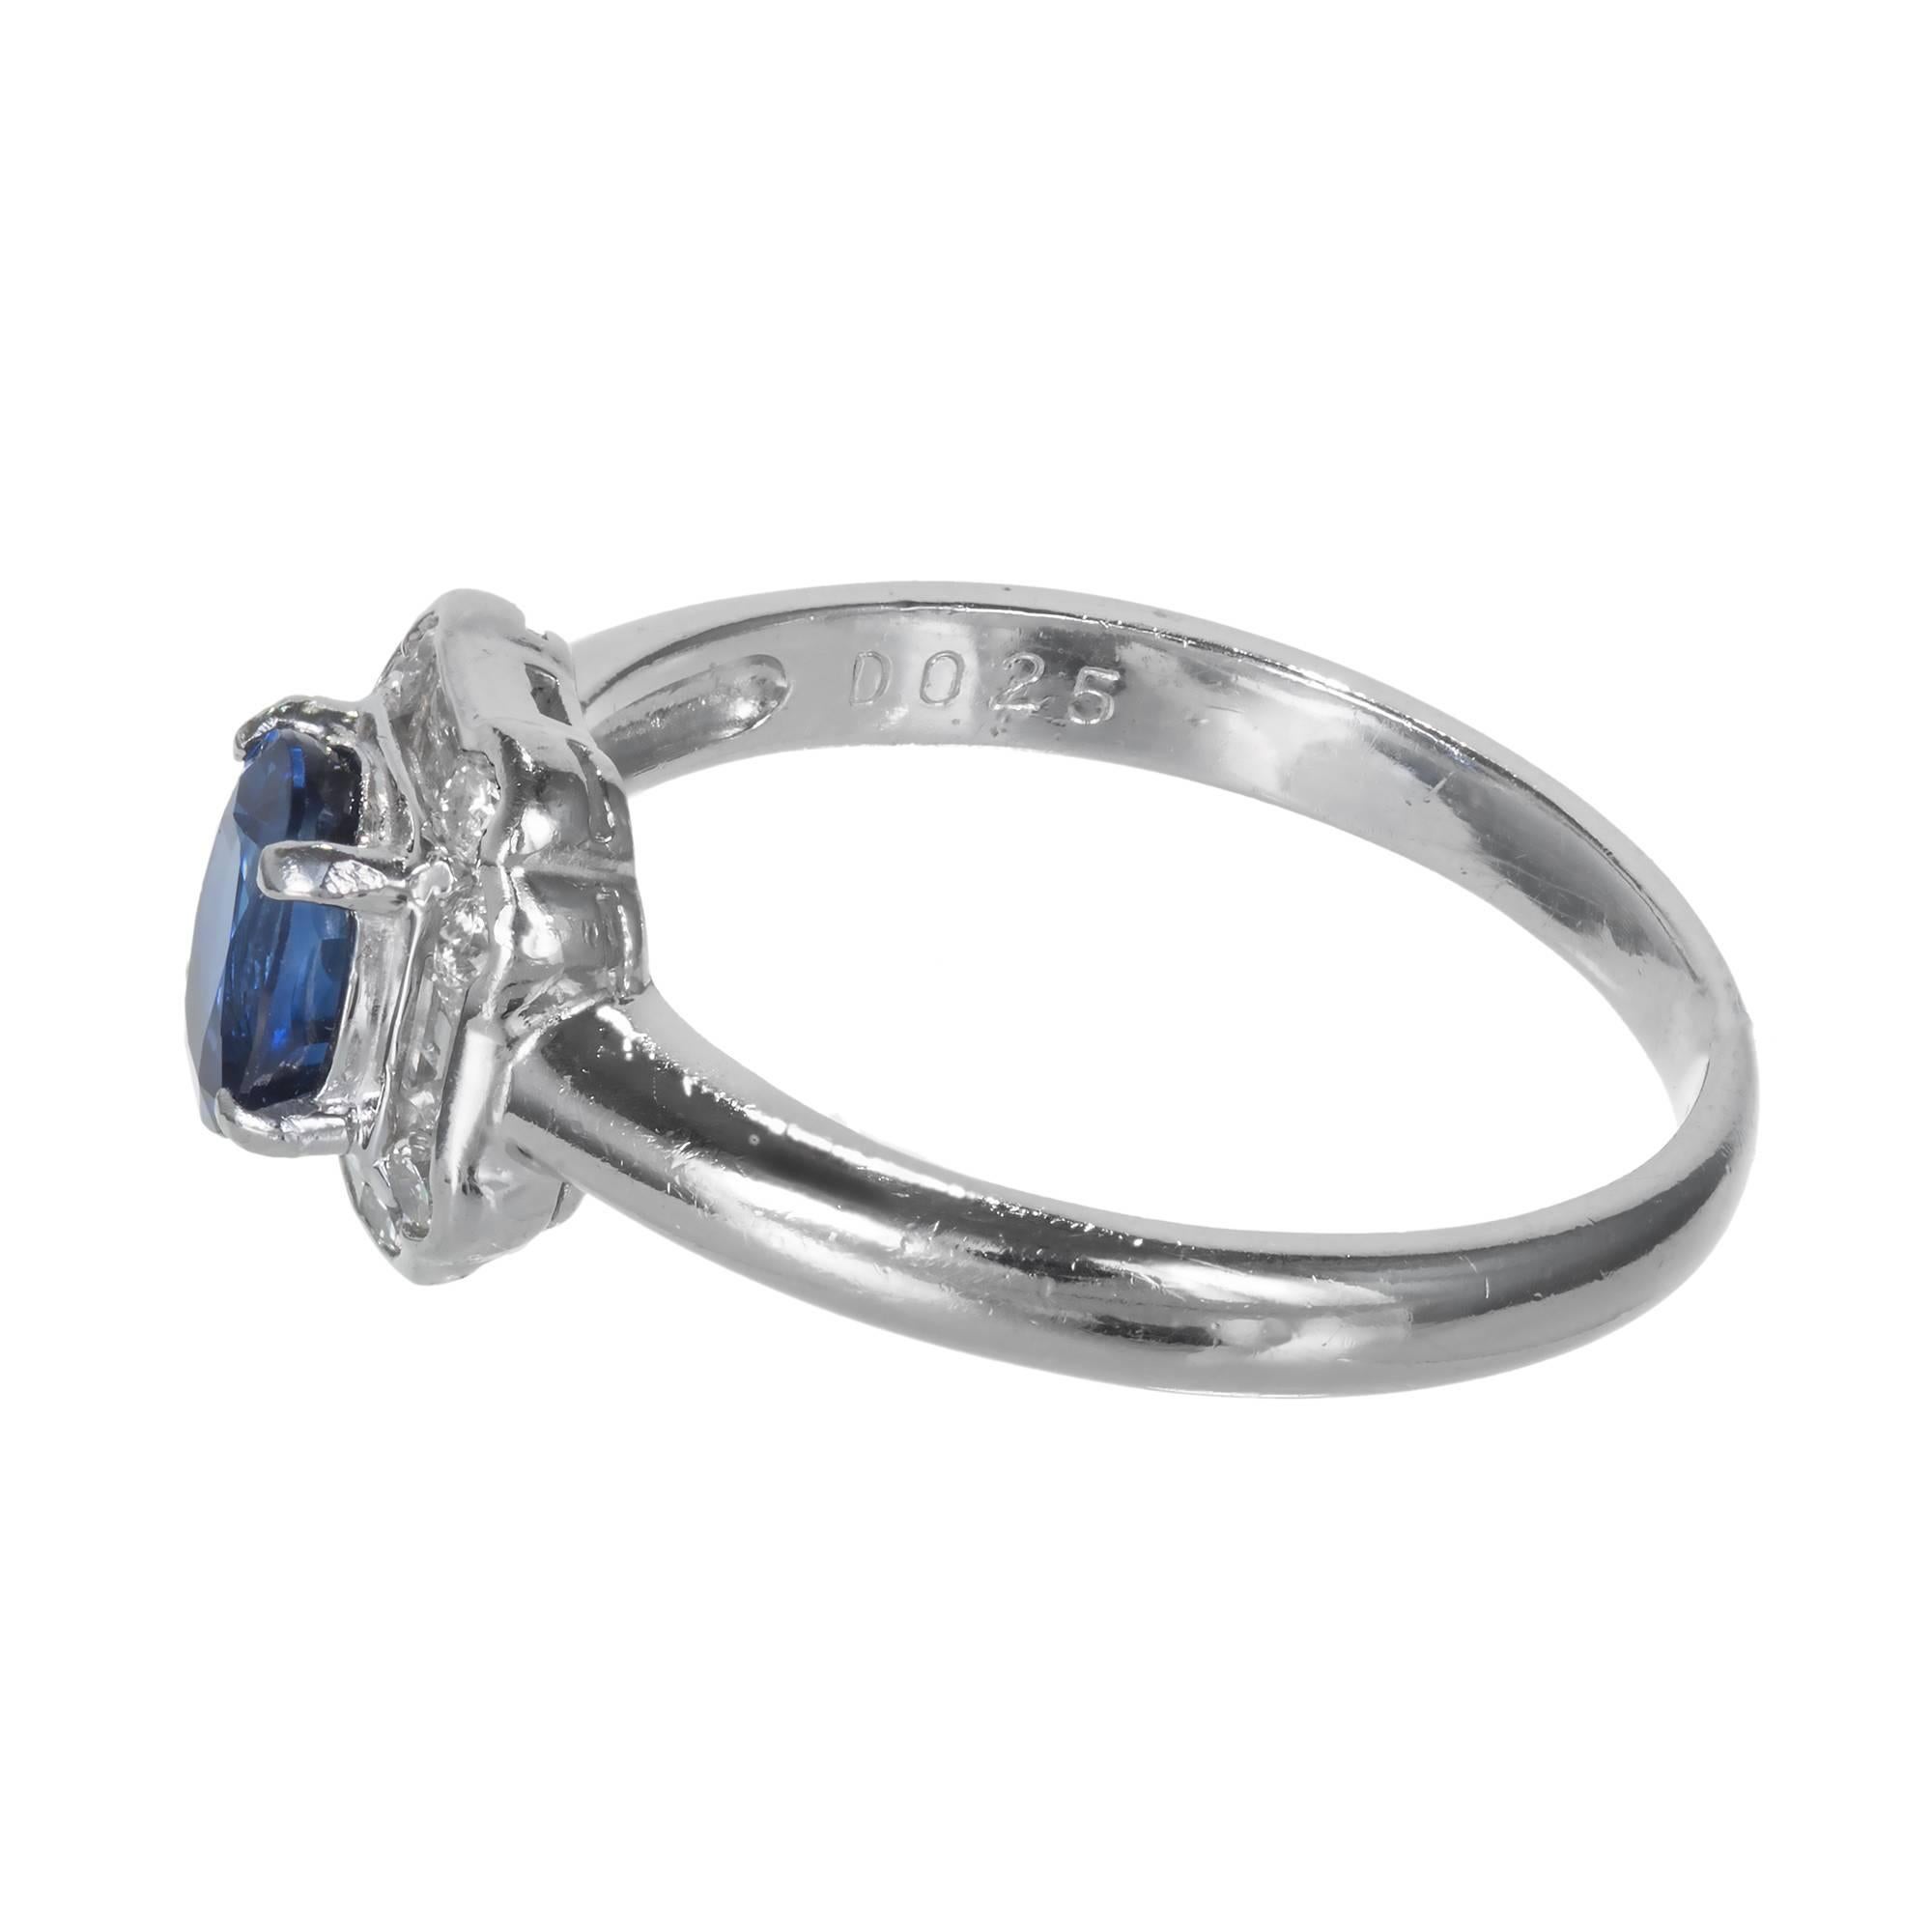 1940’s Retro Deco Style bright Ceylon oval Sapphire engagement ring surrounded by diamonds in a platinum setting.

1 oval sapphire .80cts.
8 round diamonds approx. total weight .25cts, F, VS.
Size 6 and sizable
Platinum
Stamped Platinum D 0.25